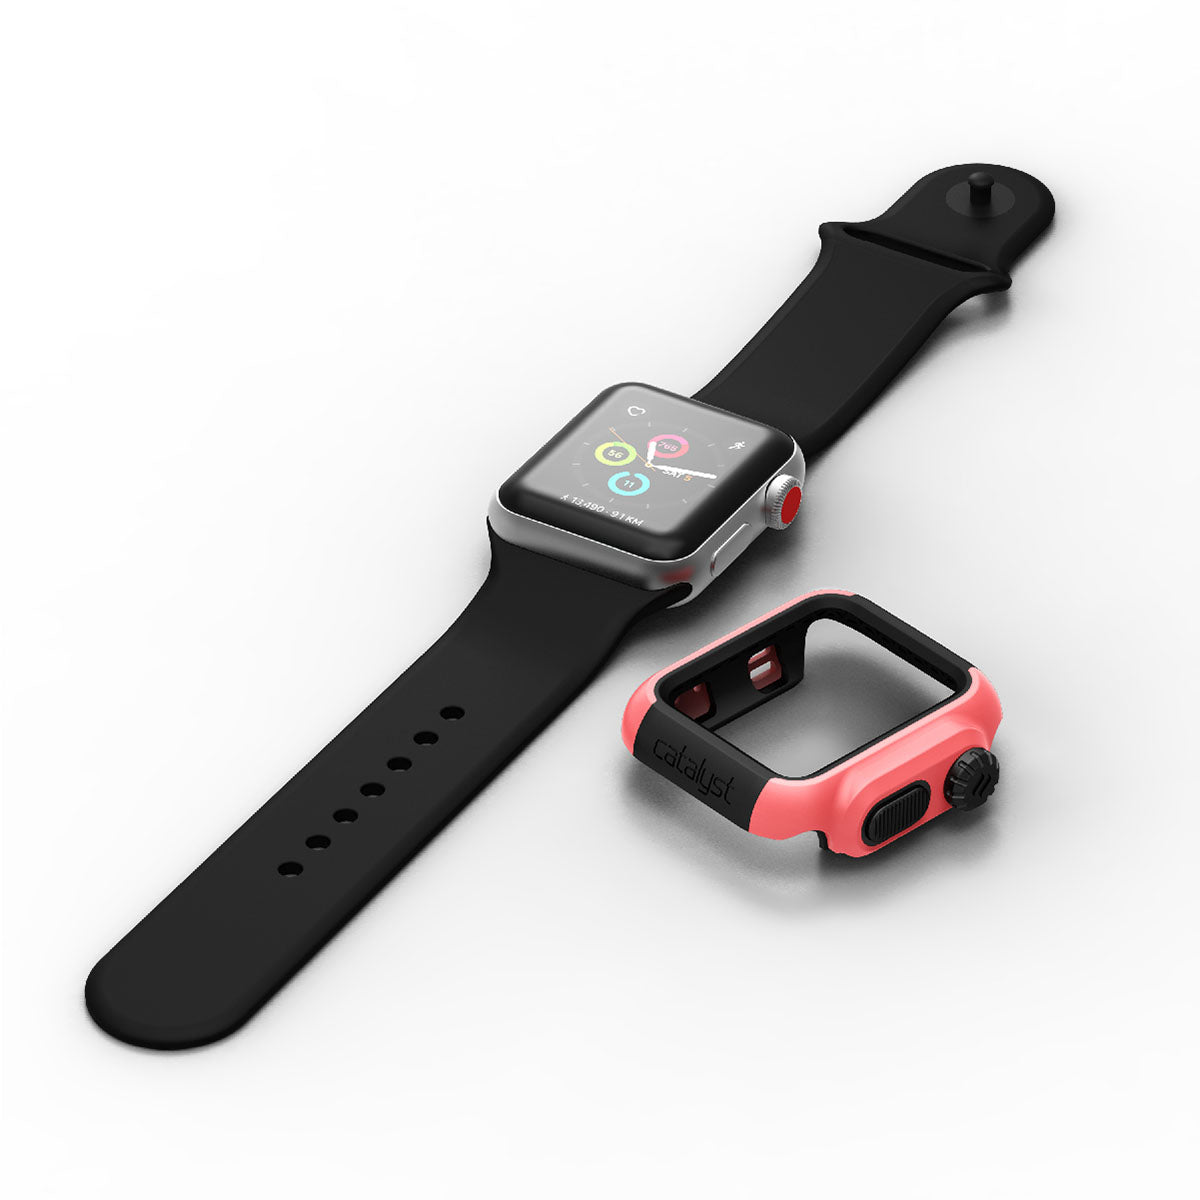 catalyst apple watch series 3 2 38mm impact protection case apple watch with black band and uninstalled impact protection case coral